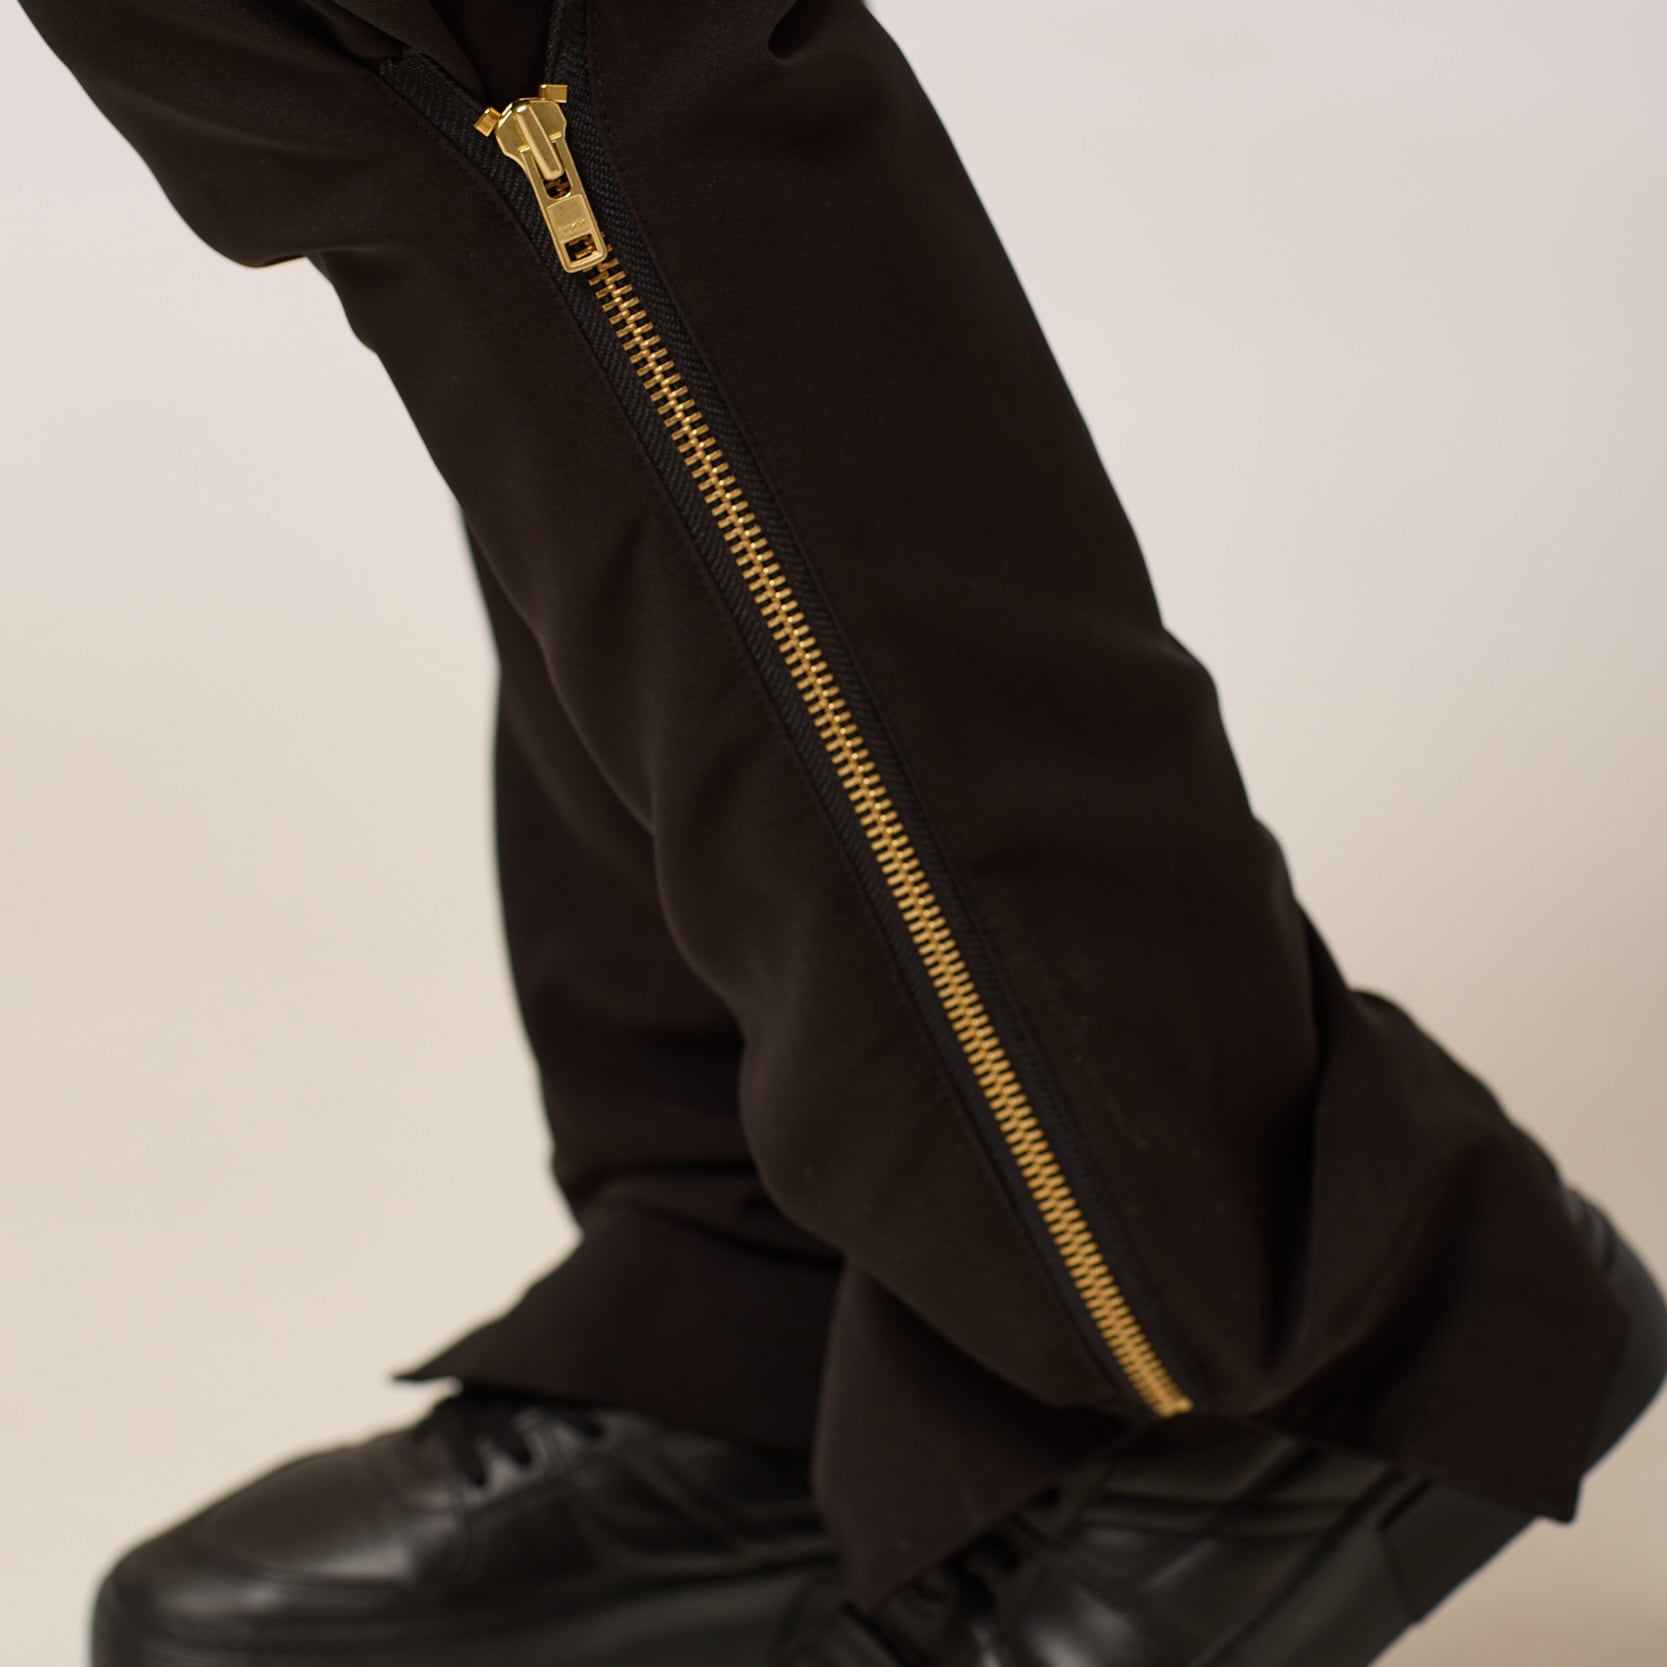 ZERØ London - Alt. close up. Mens zero waste tapered trouser with gold zips designed & made in London